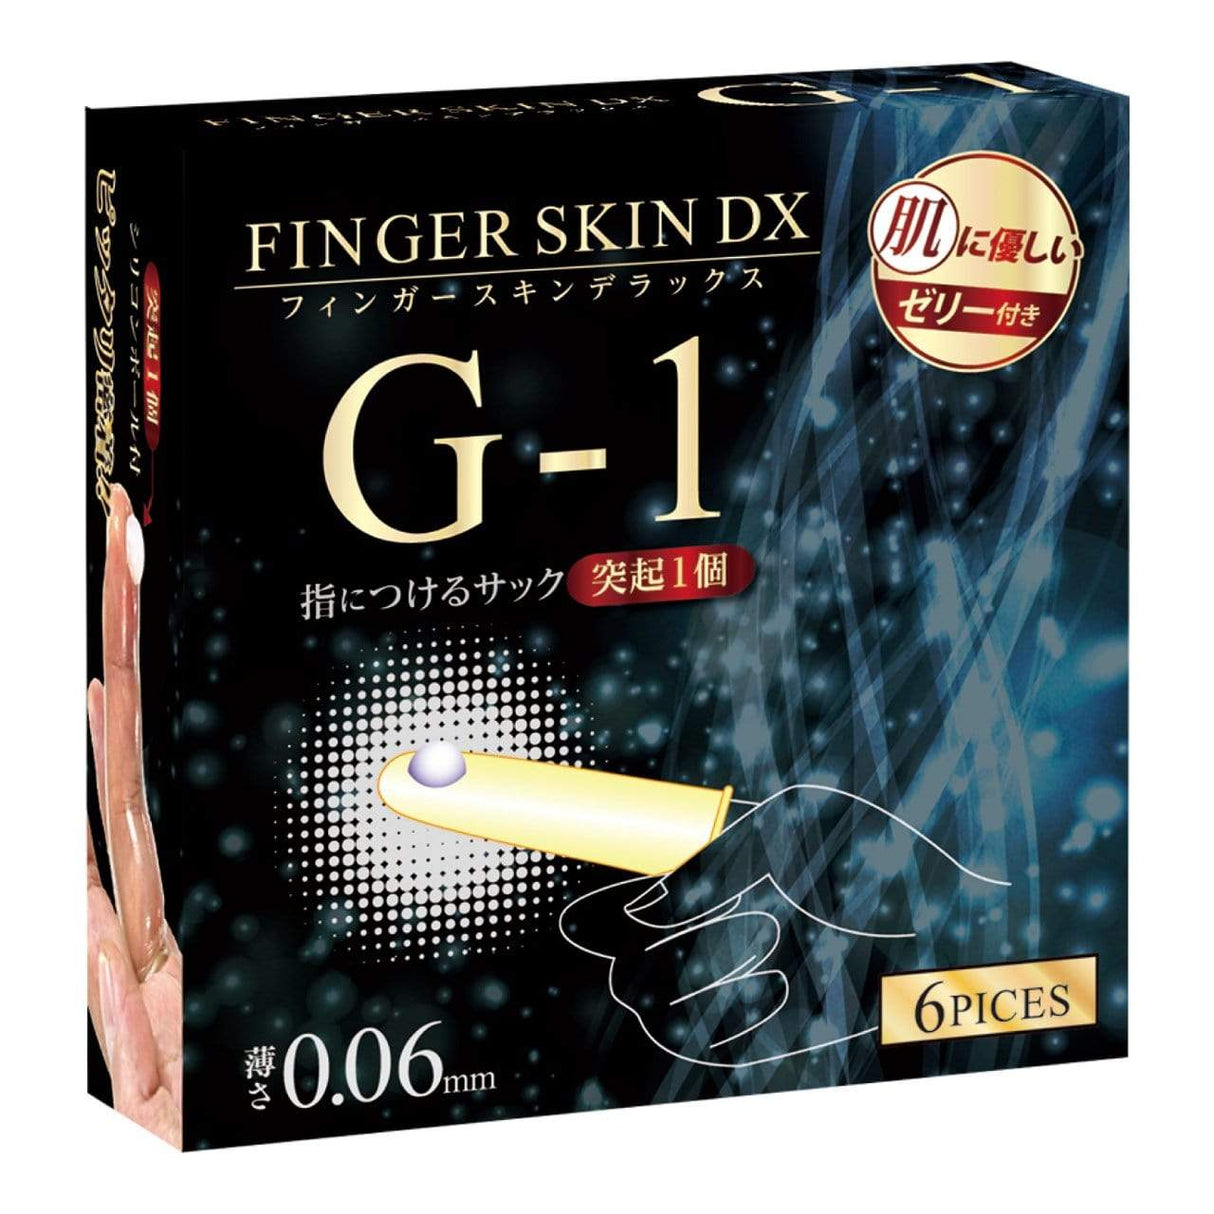 Kiss Me Love - Finger Skin DX Finger Sleeves 6 Pieces  Clear 4560444118144 Clit Massager (Non Vibration)